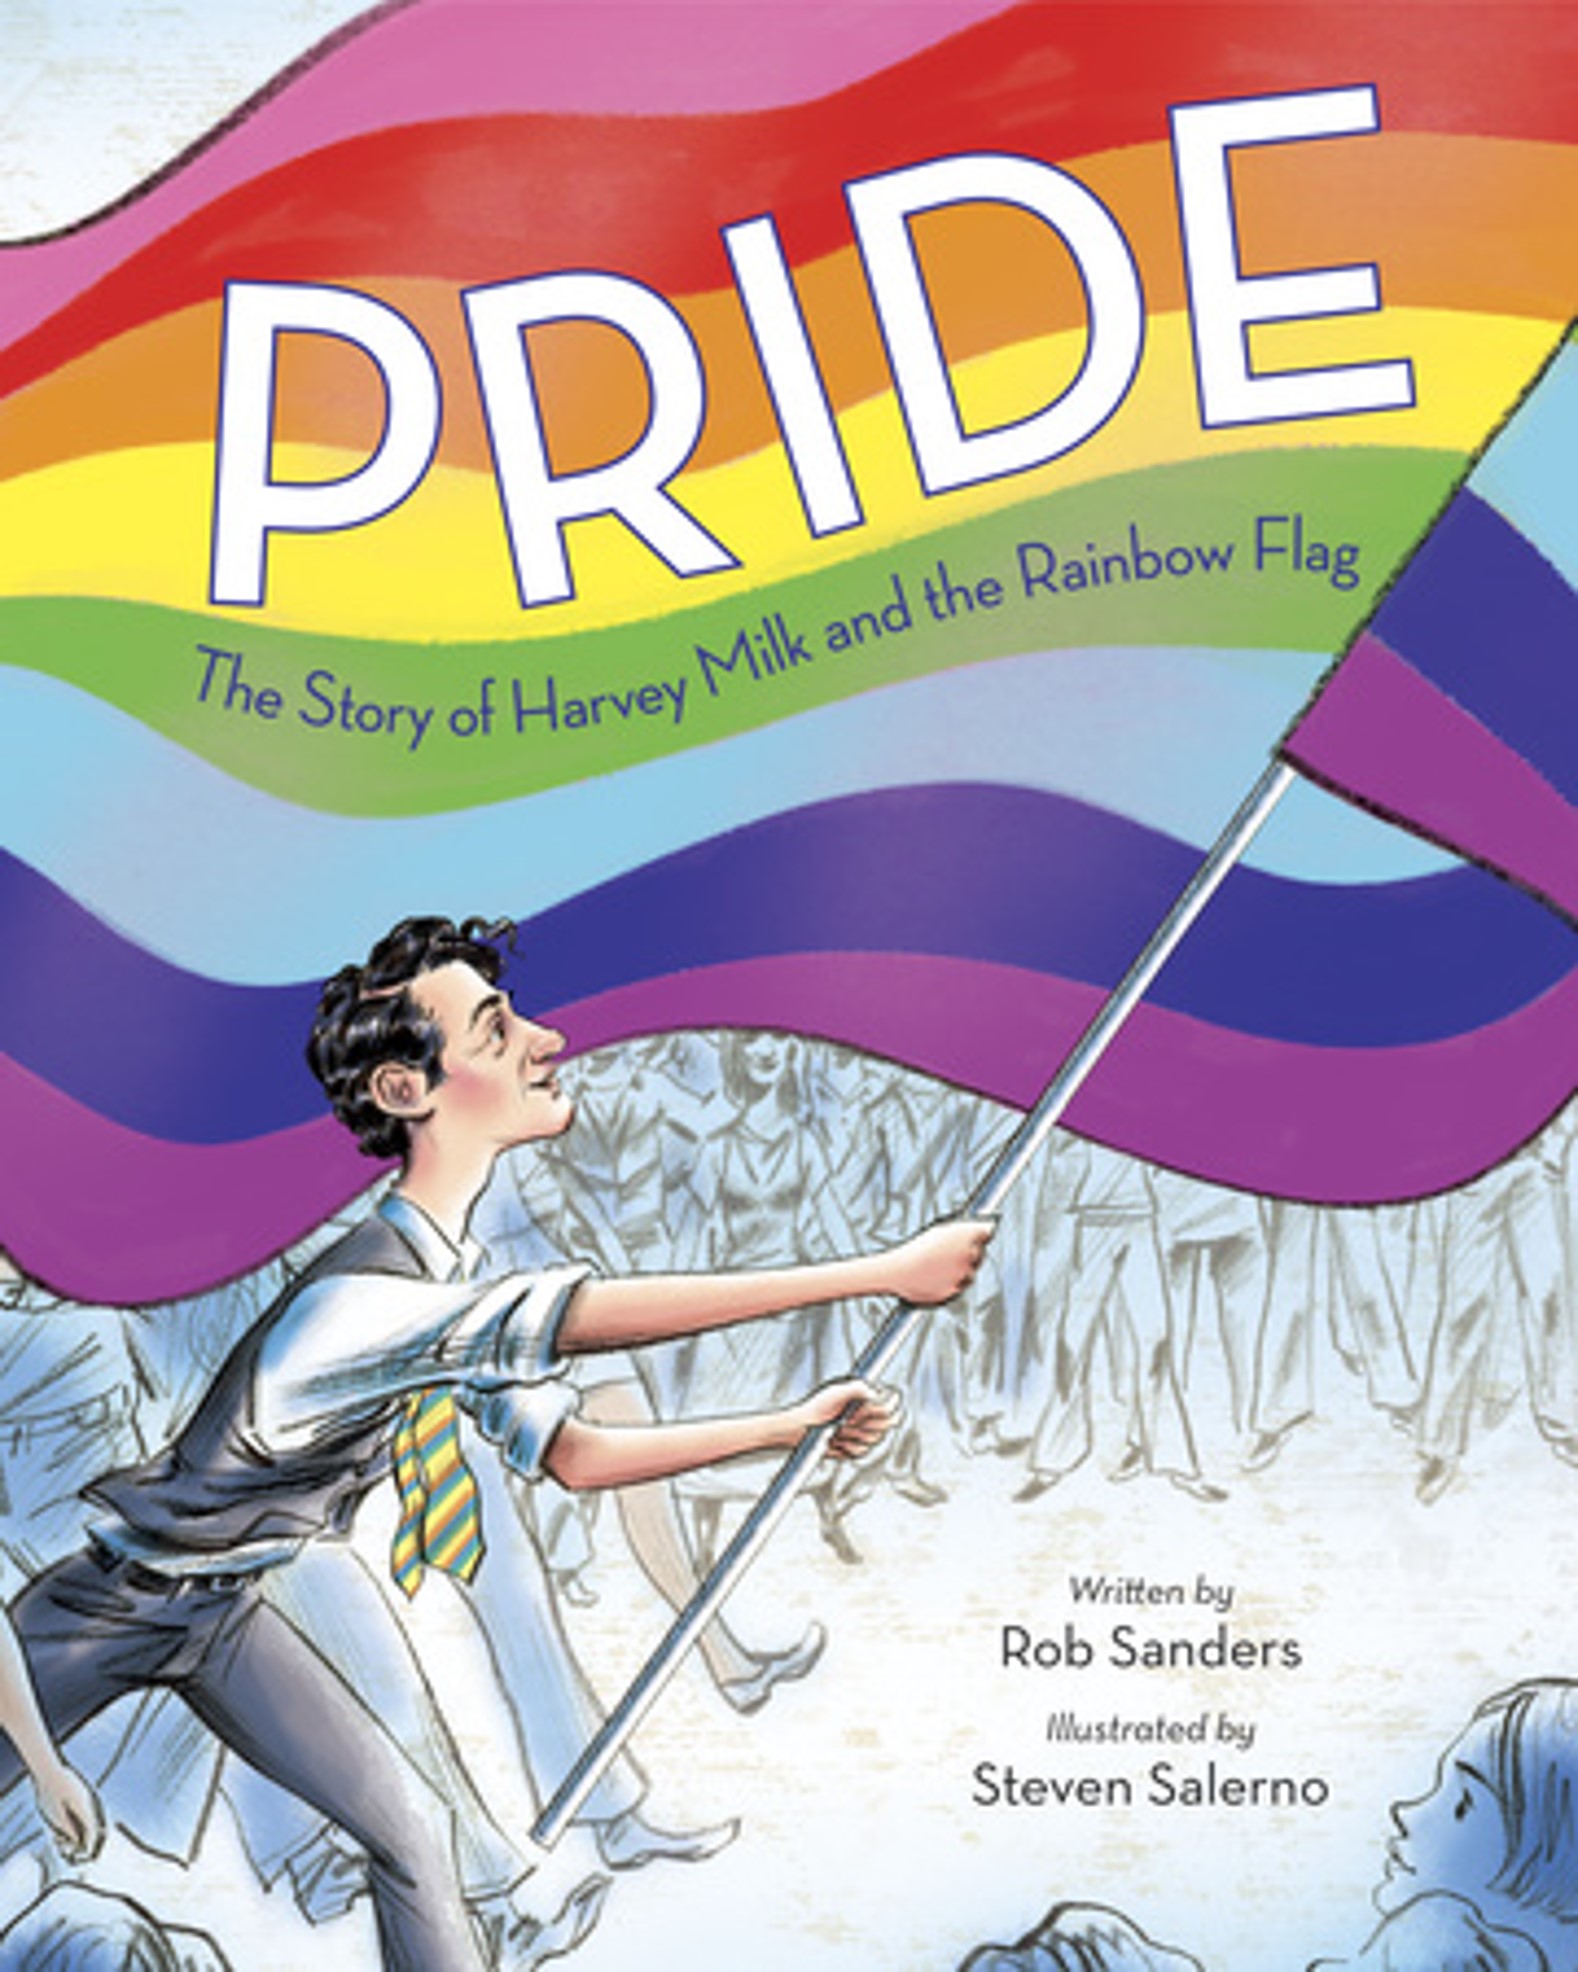 Book cover of Pride: The Story of Harvey Milk and the Rainbow Flag.